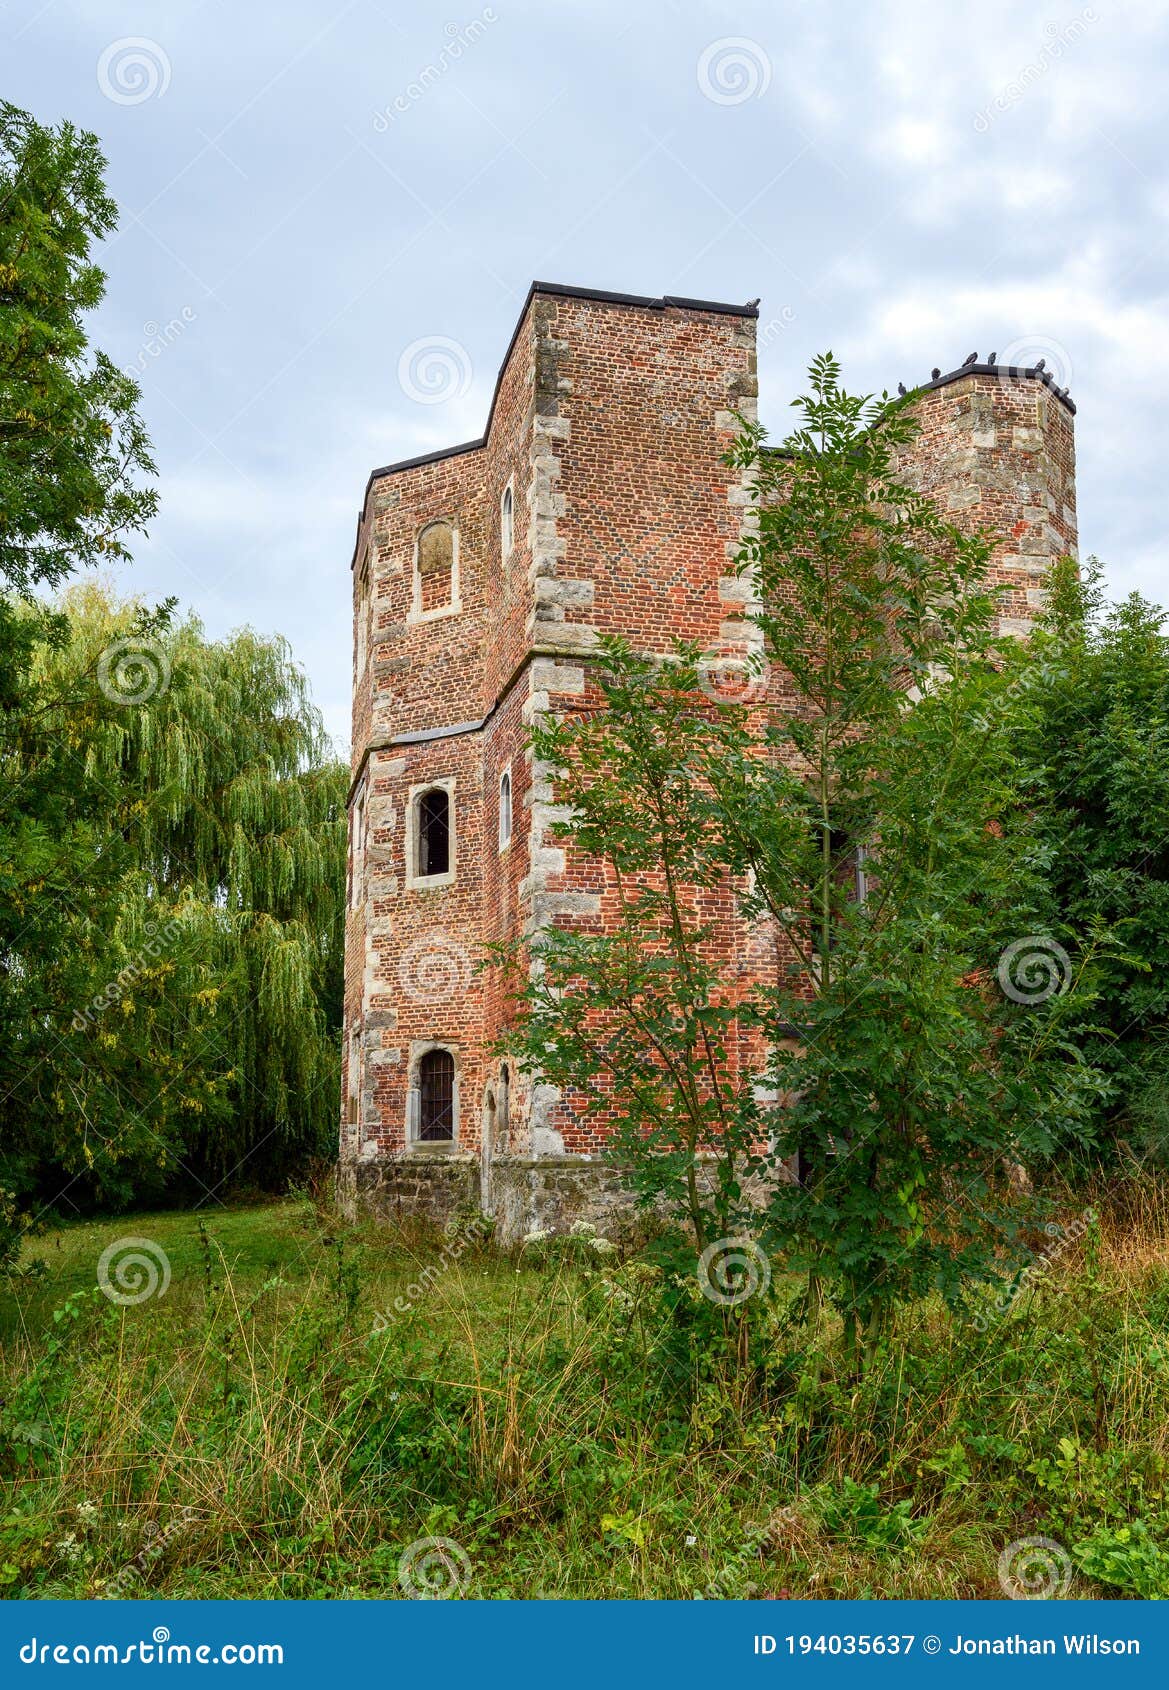 otford palace or the archbishop`s palace in otford, kent, uk